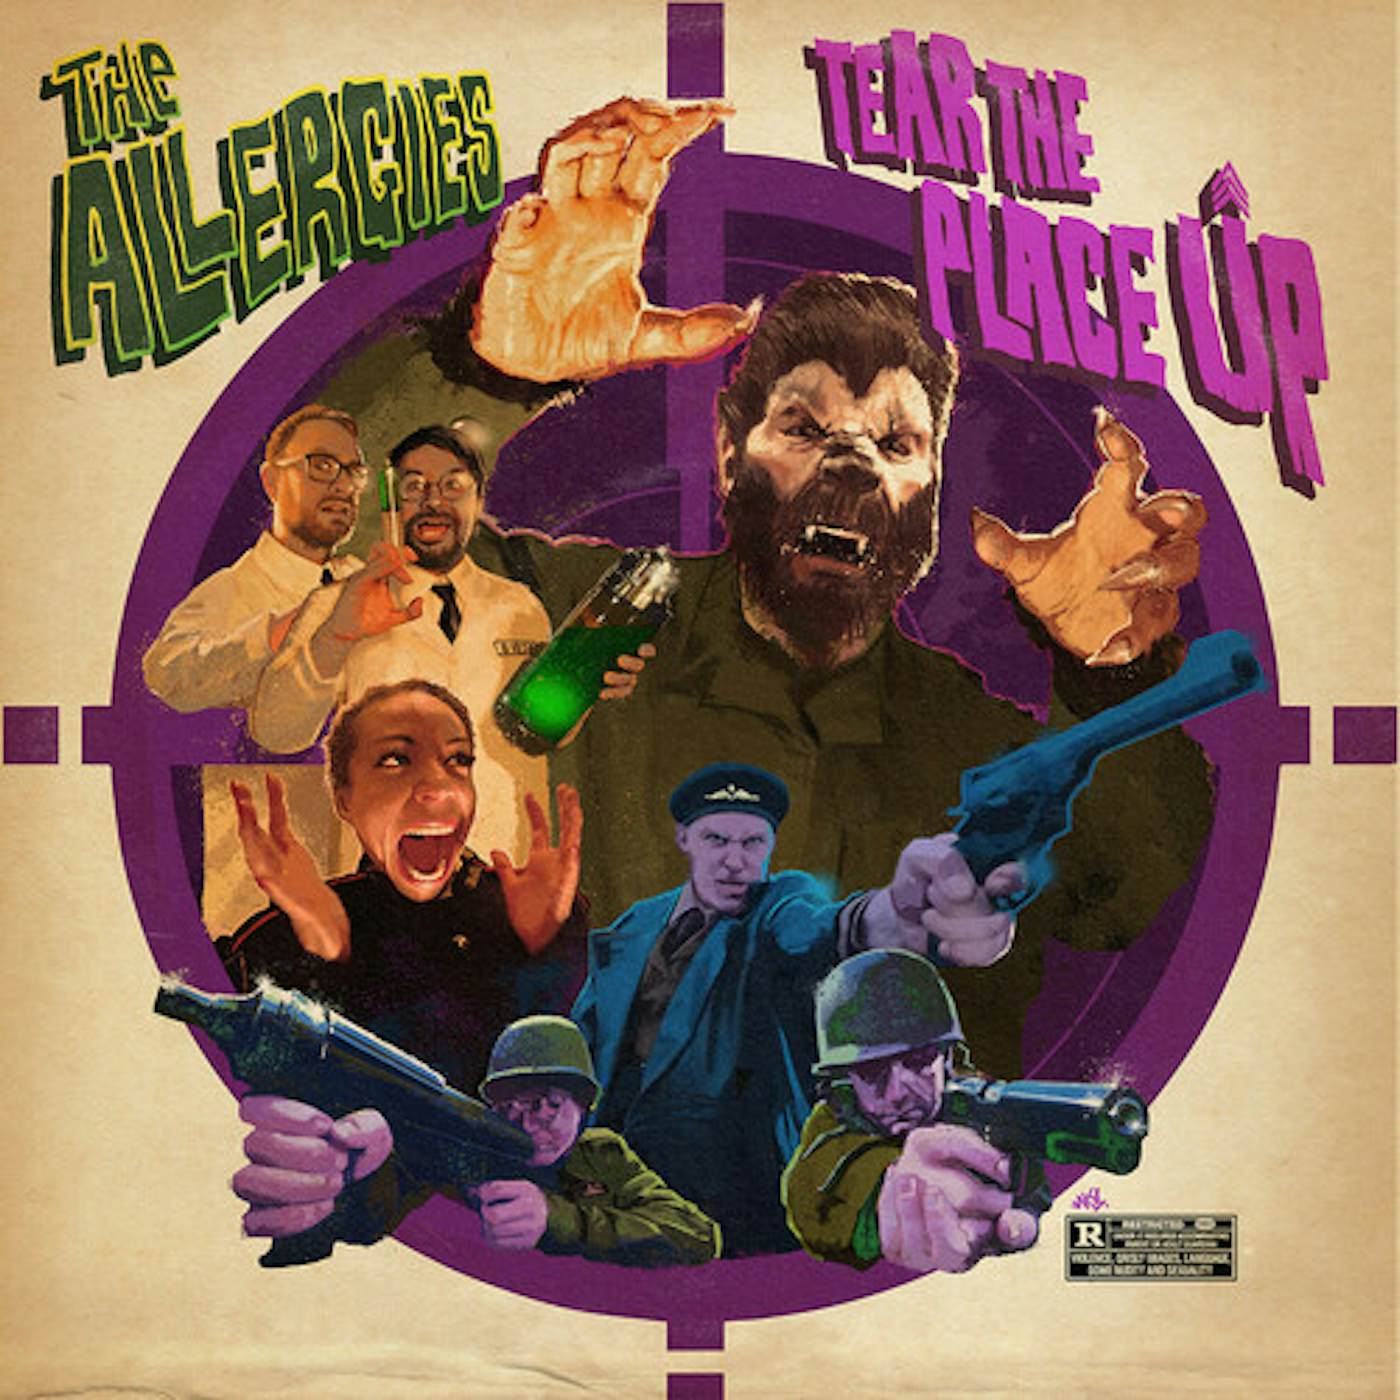 The Allergies TEAR THE PLACE UP CD